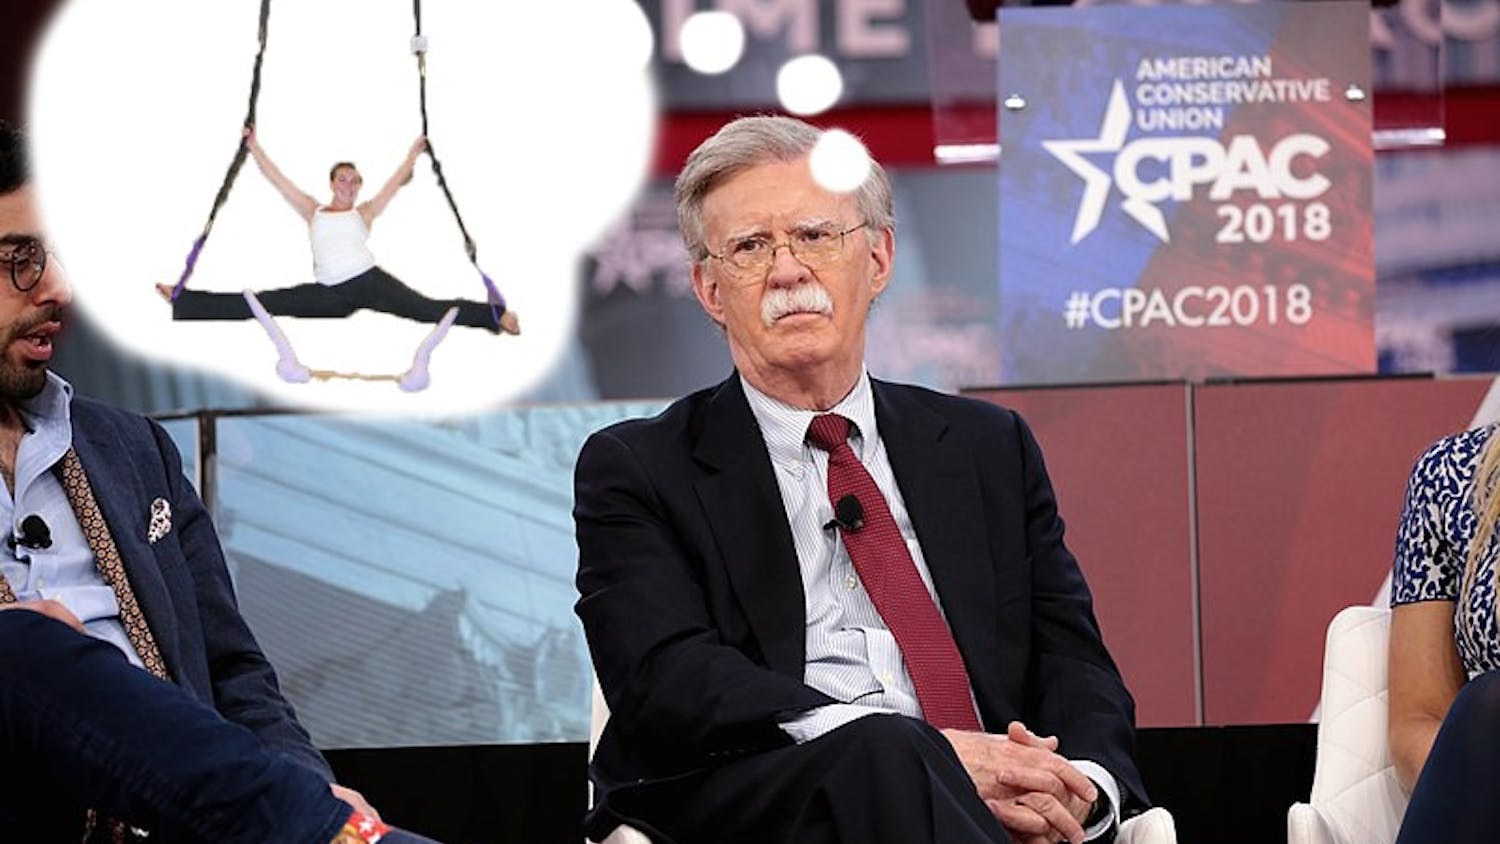 Mr. Bolton reminds us that it's never too late to follow your severely underpaid&nbsp;dreams.